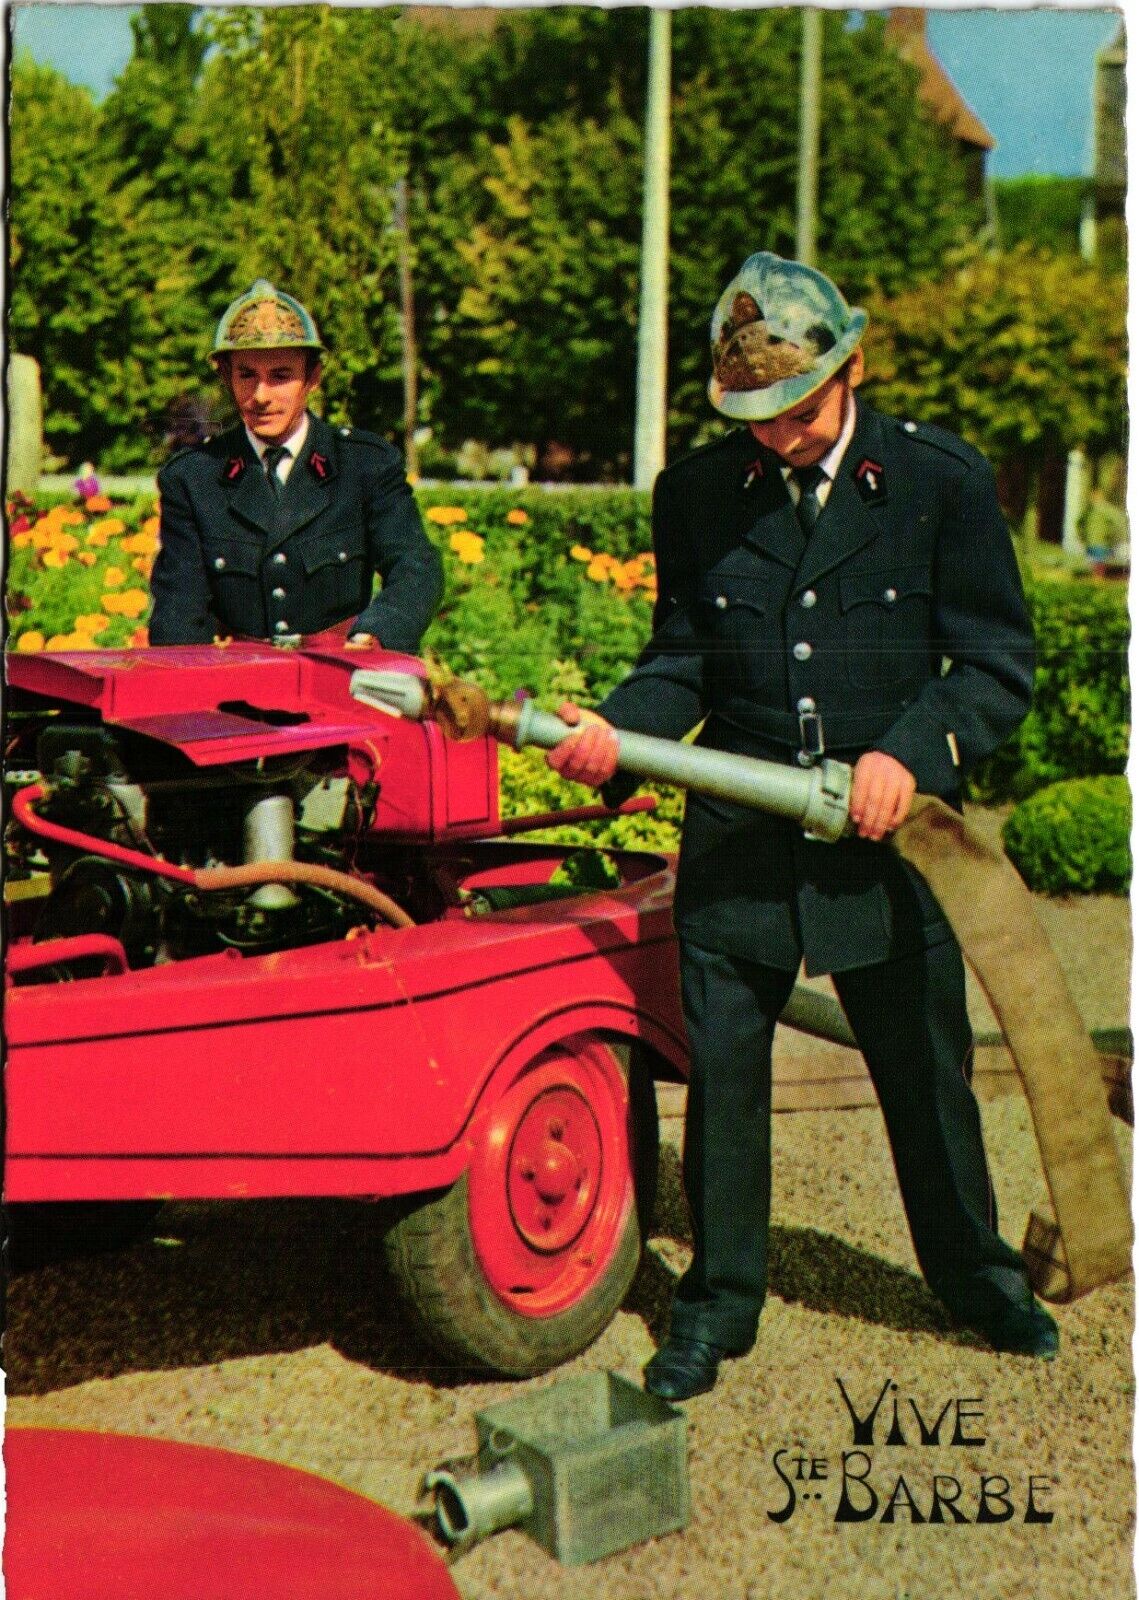 French firemen fire-fighter and fire truck 1960s old postcard